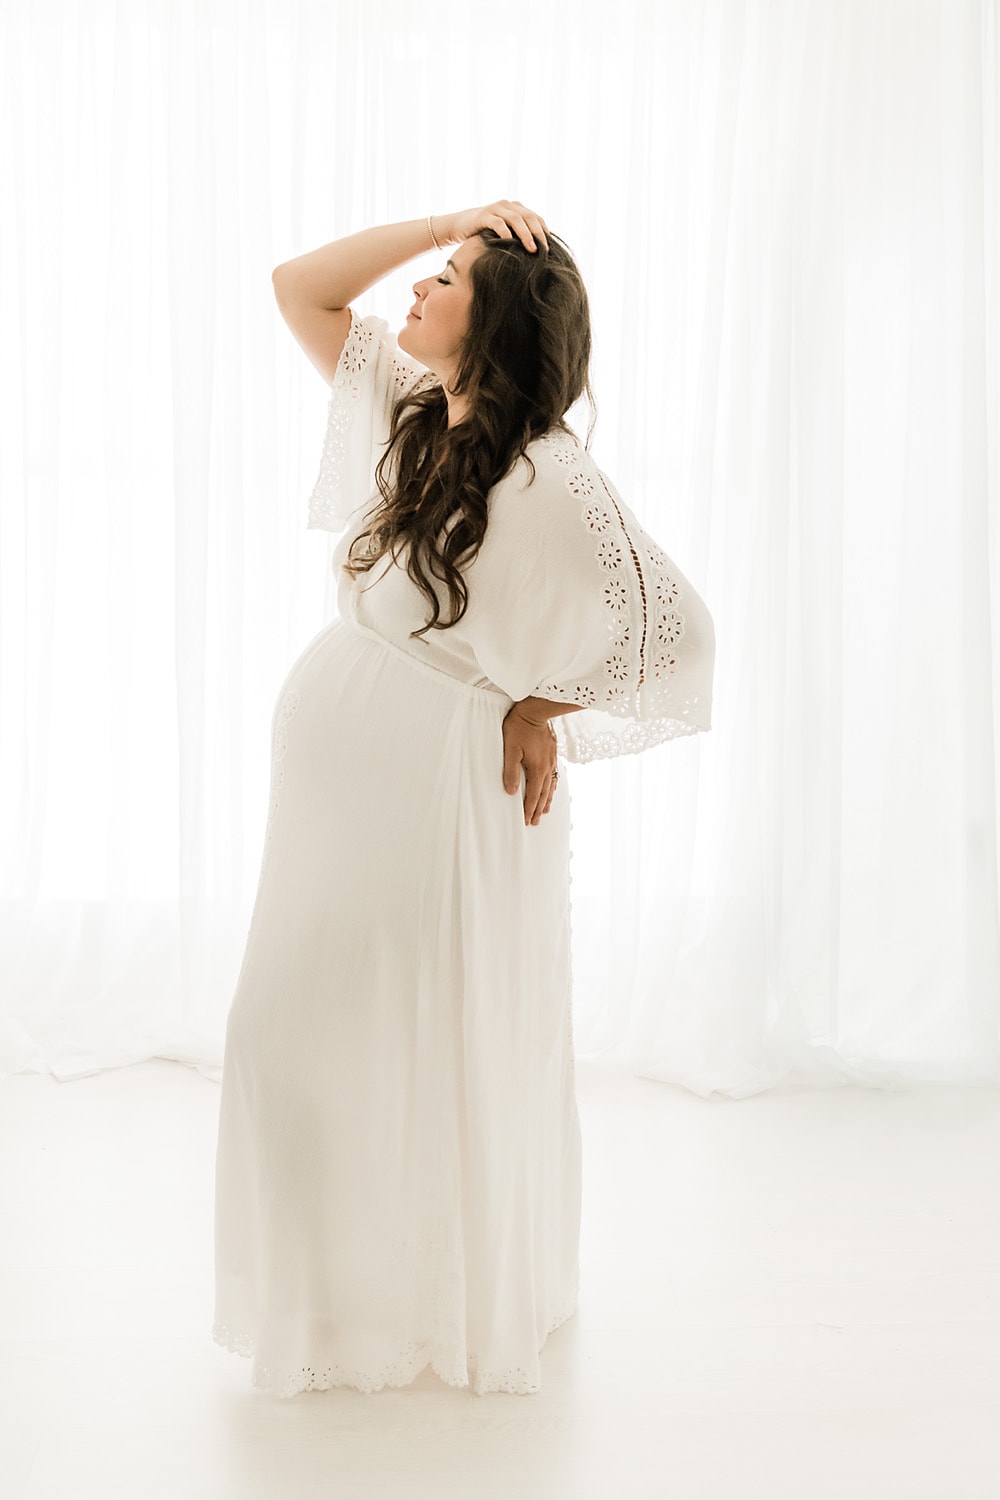 pregnant woman posing in front of a white window